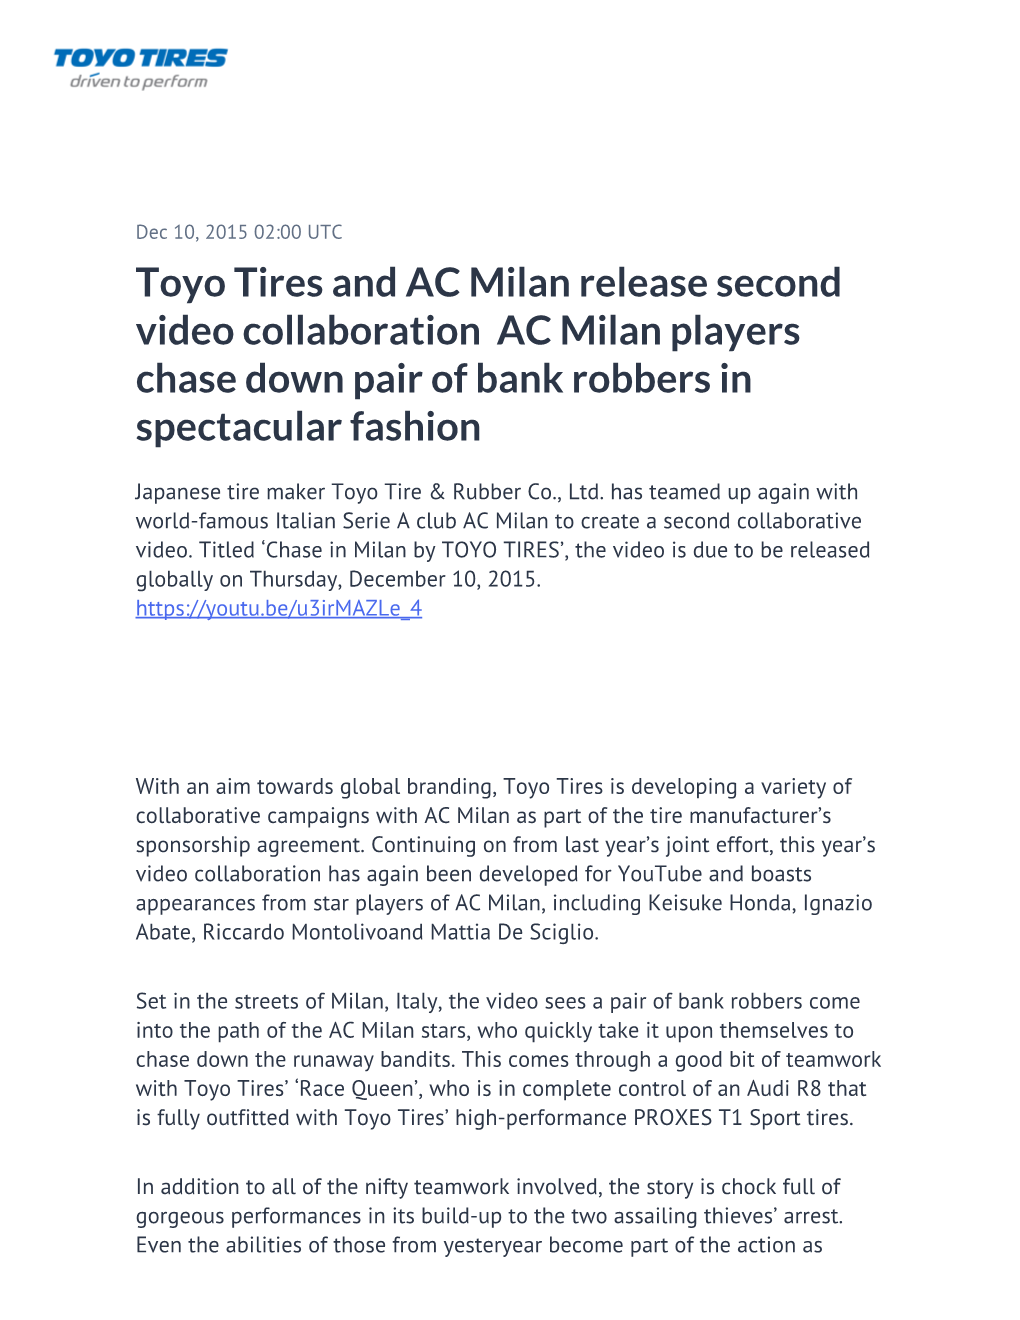 Toyo Tires and AC Milan Release Second Video Collaboration AC Milan Players Chase Down Pair of Bank Robbers in Spectacular Fashion